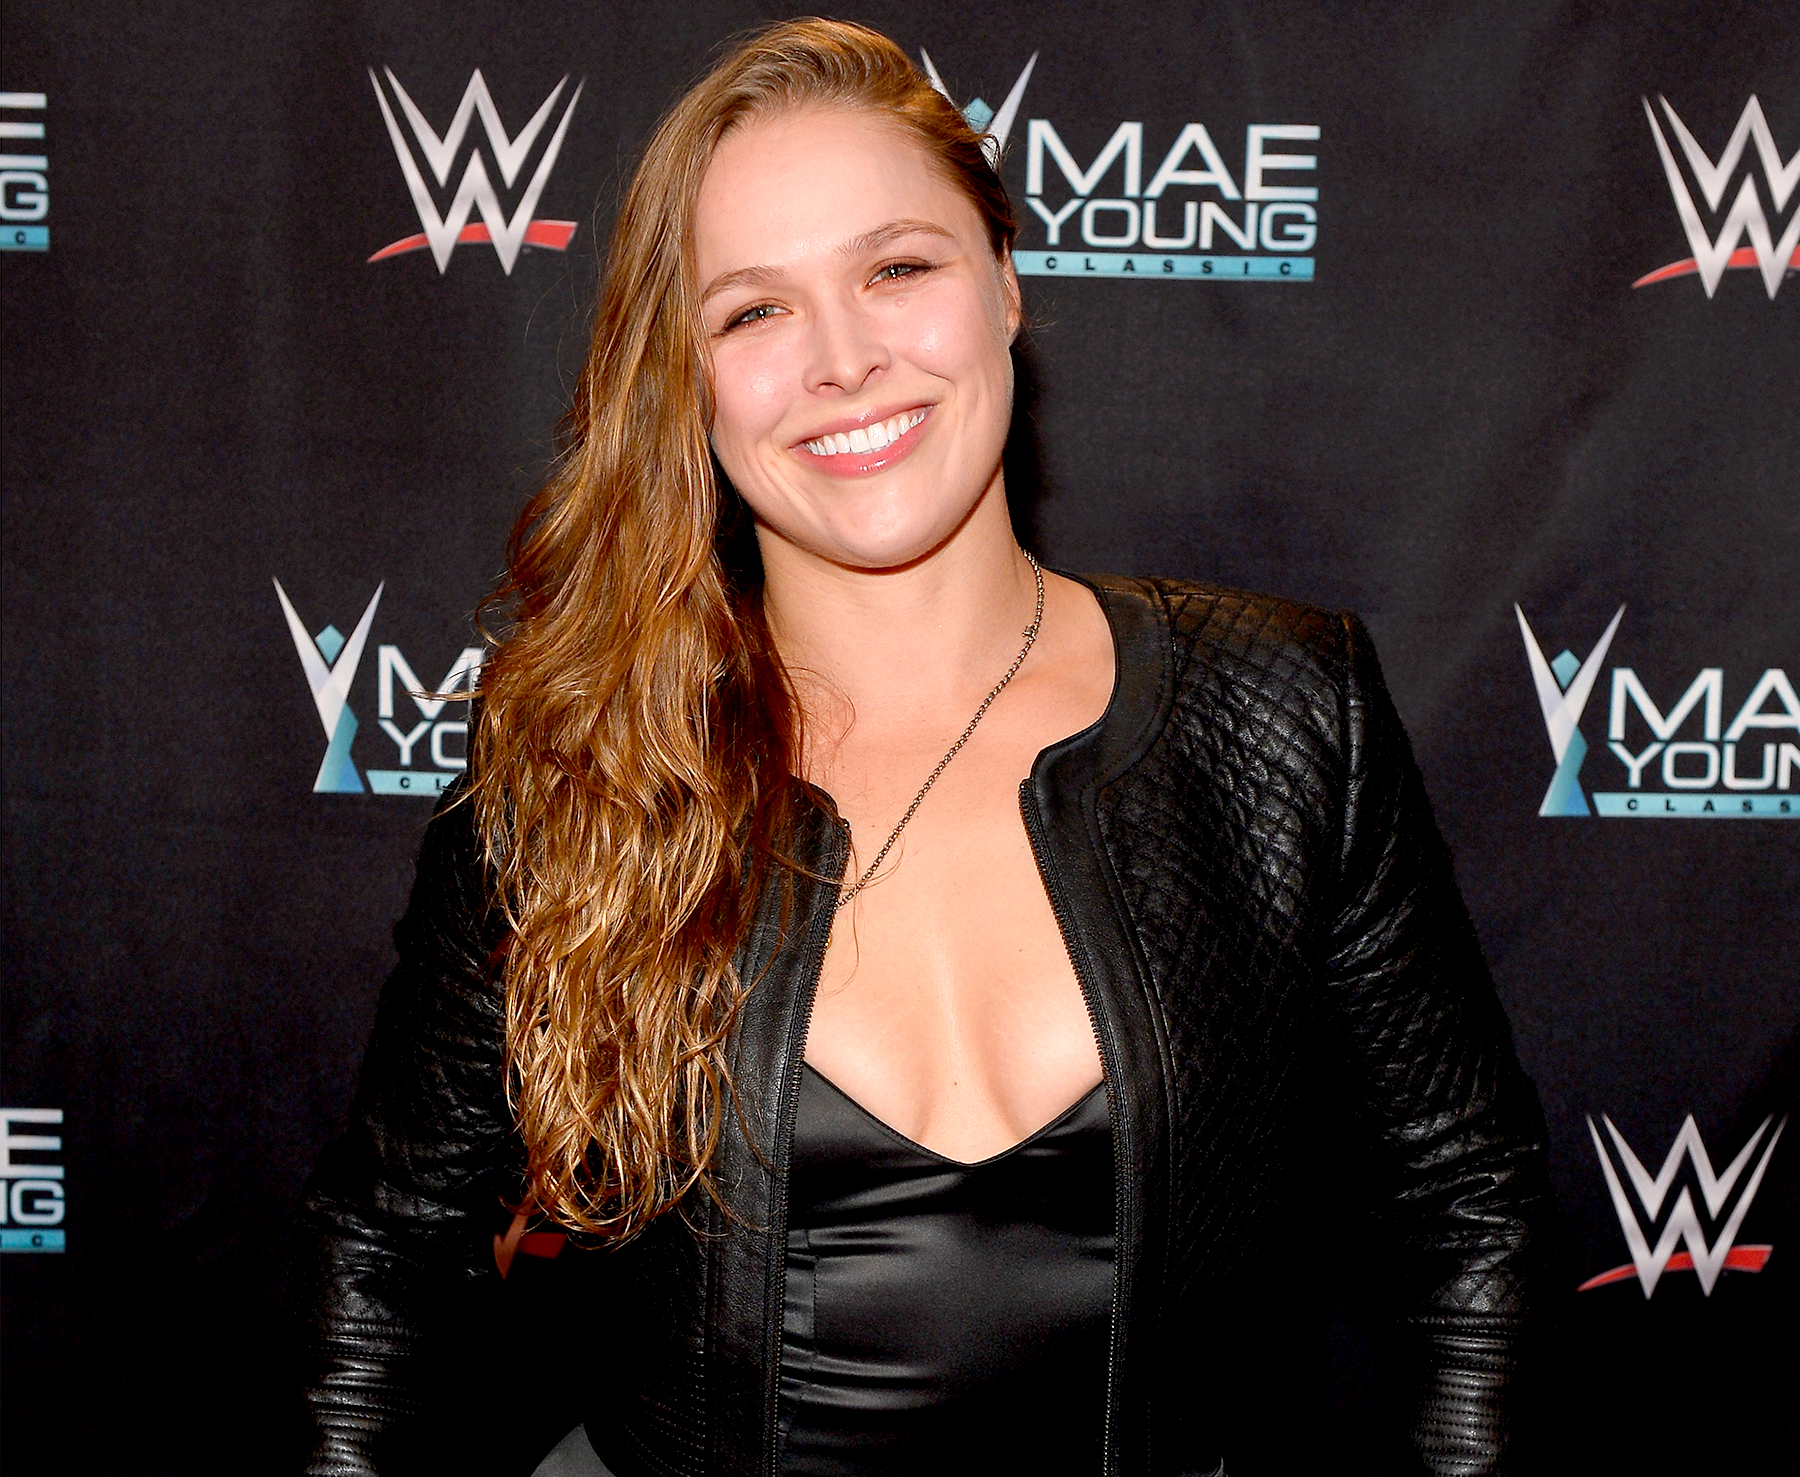 Ww Wwe Oscar Sexy Videos - Ronda Rousey Officially Joins WWE: Watch the Video